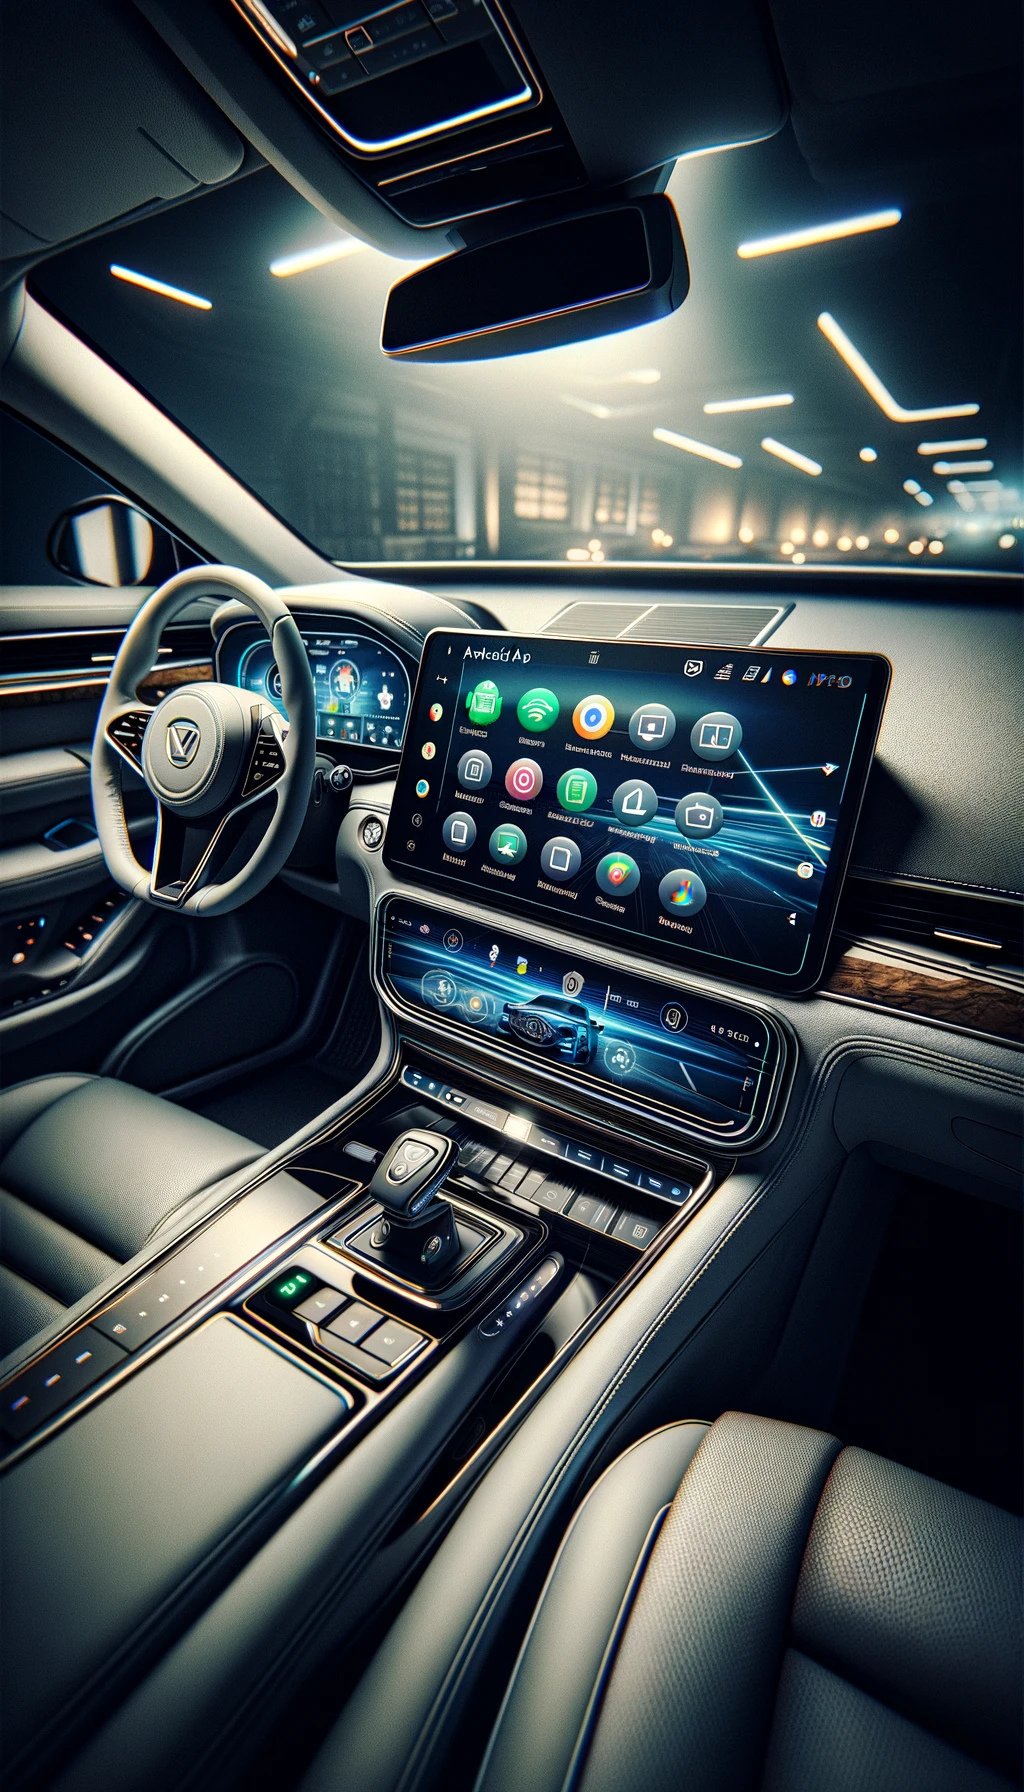 A luxurious car interior showcasing the Android Auto interface on a large, central touchscreen display.